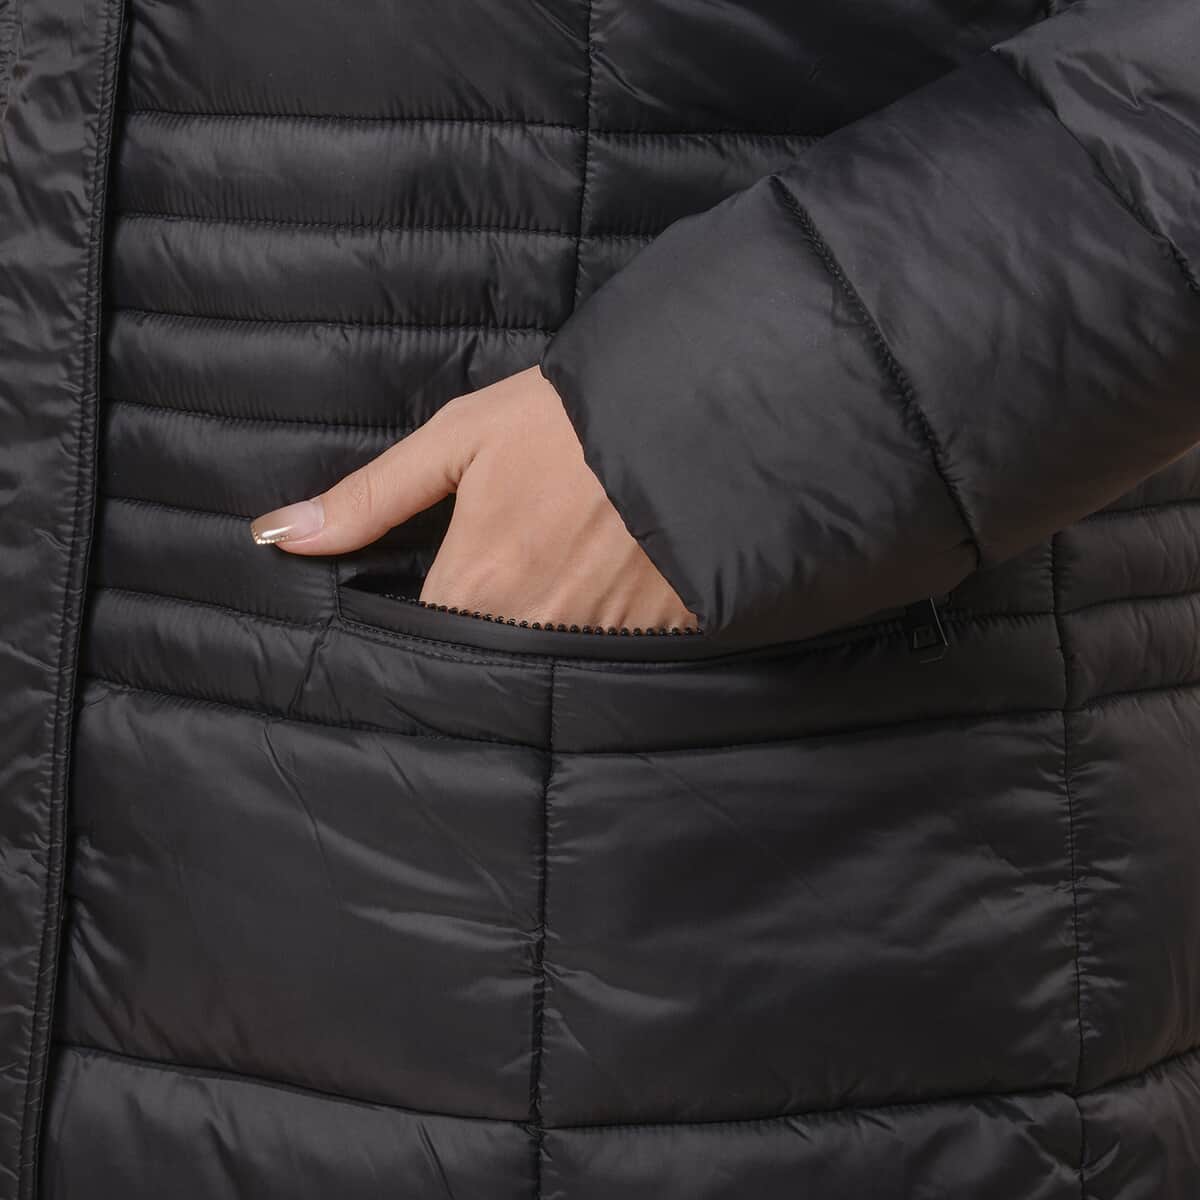 Doorbuster PASSAGE Black Long Sleeve Women Coat with 2 Zipper Pocket (S, Shell: 100% Nylon and Lining: 100% Polyester) image number 3